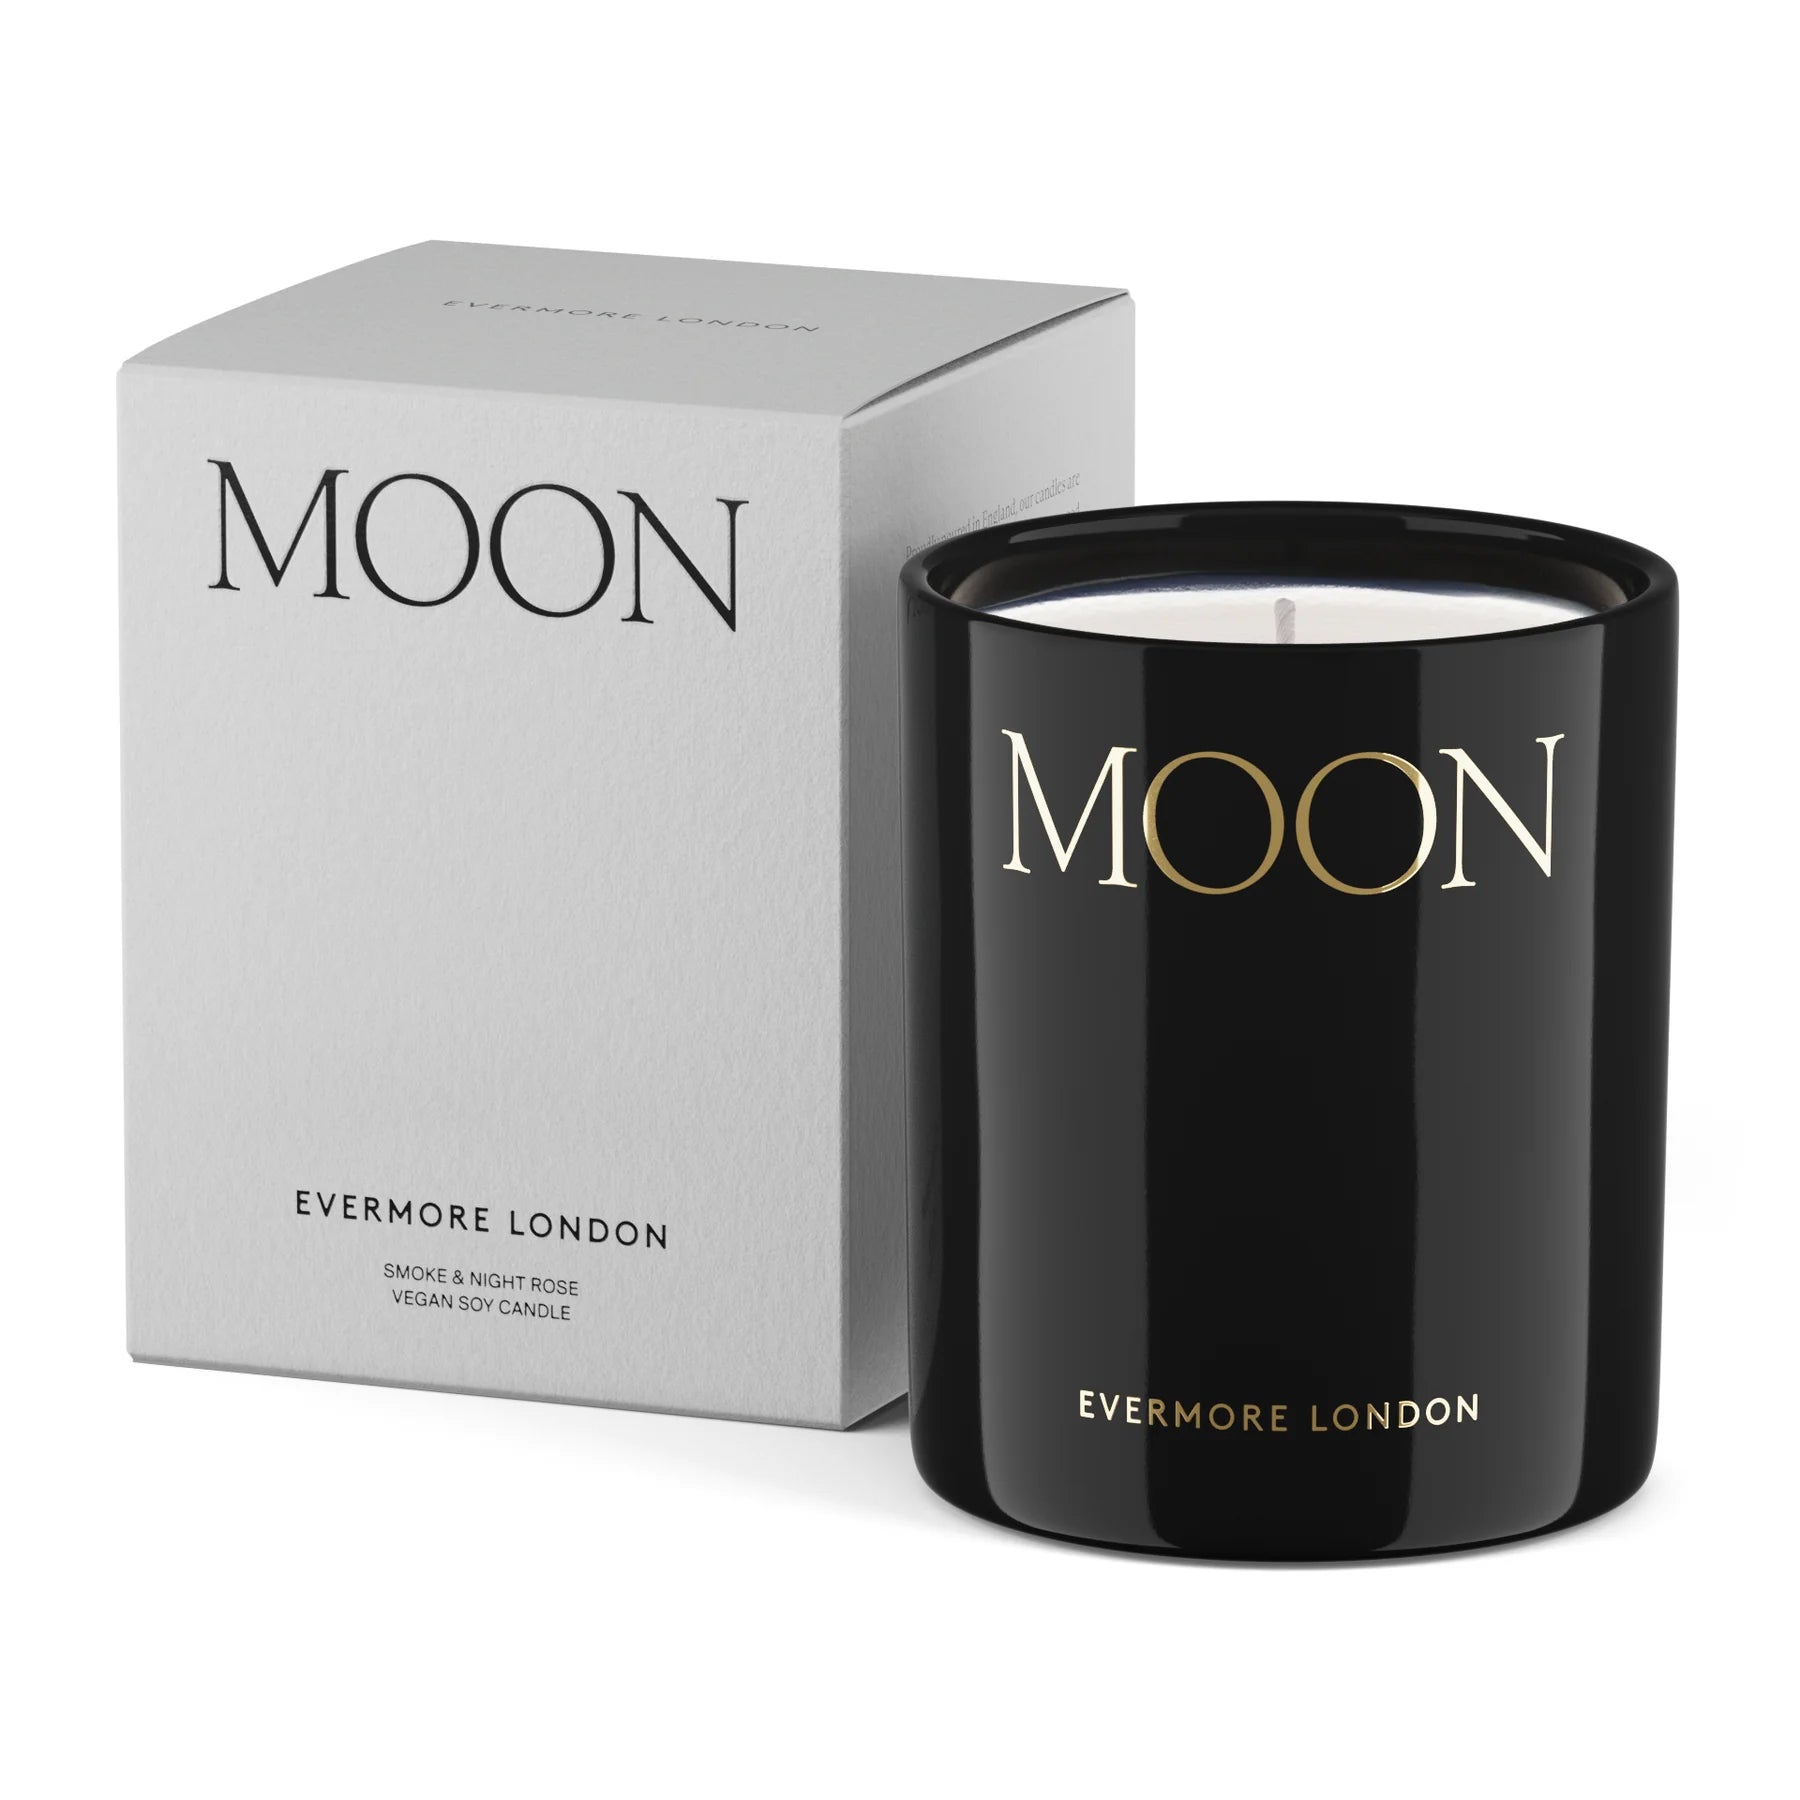 Evermore Moon Candle 300g Smoke & Night Rose